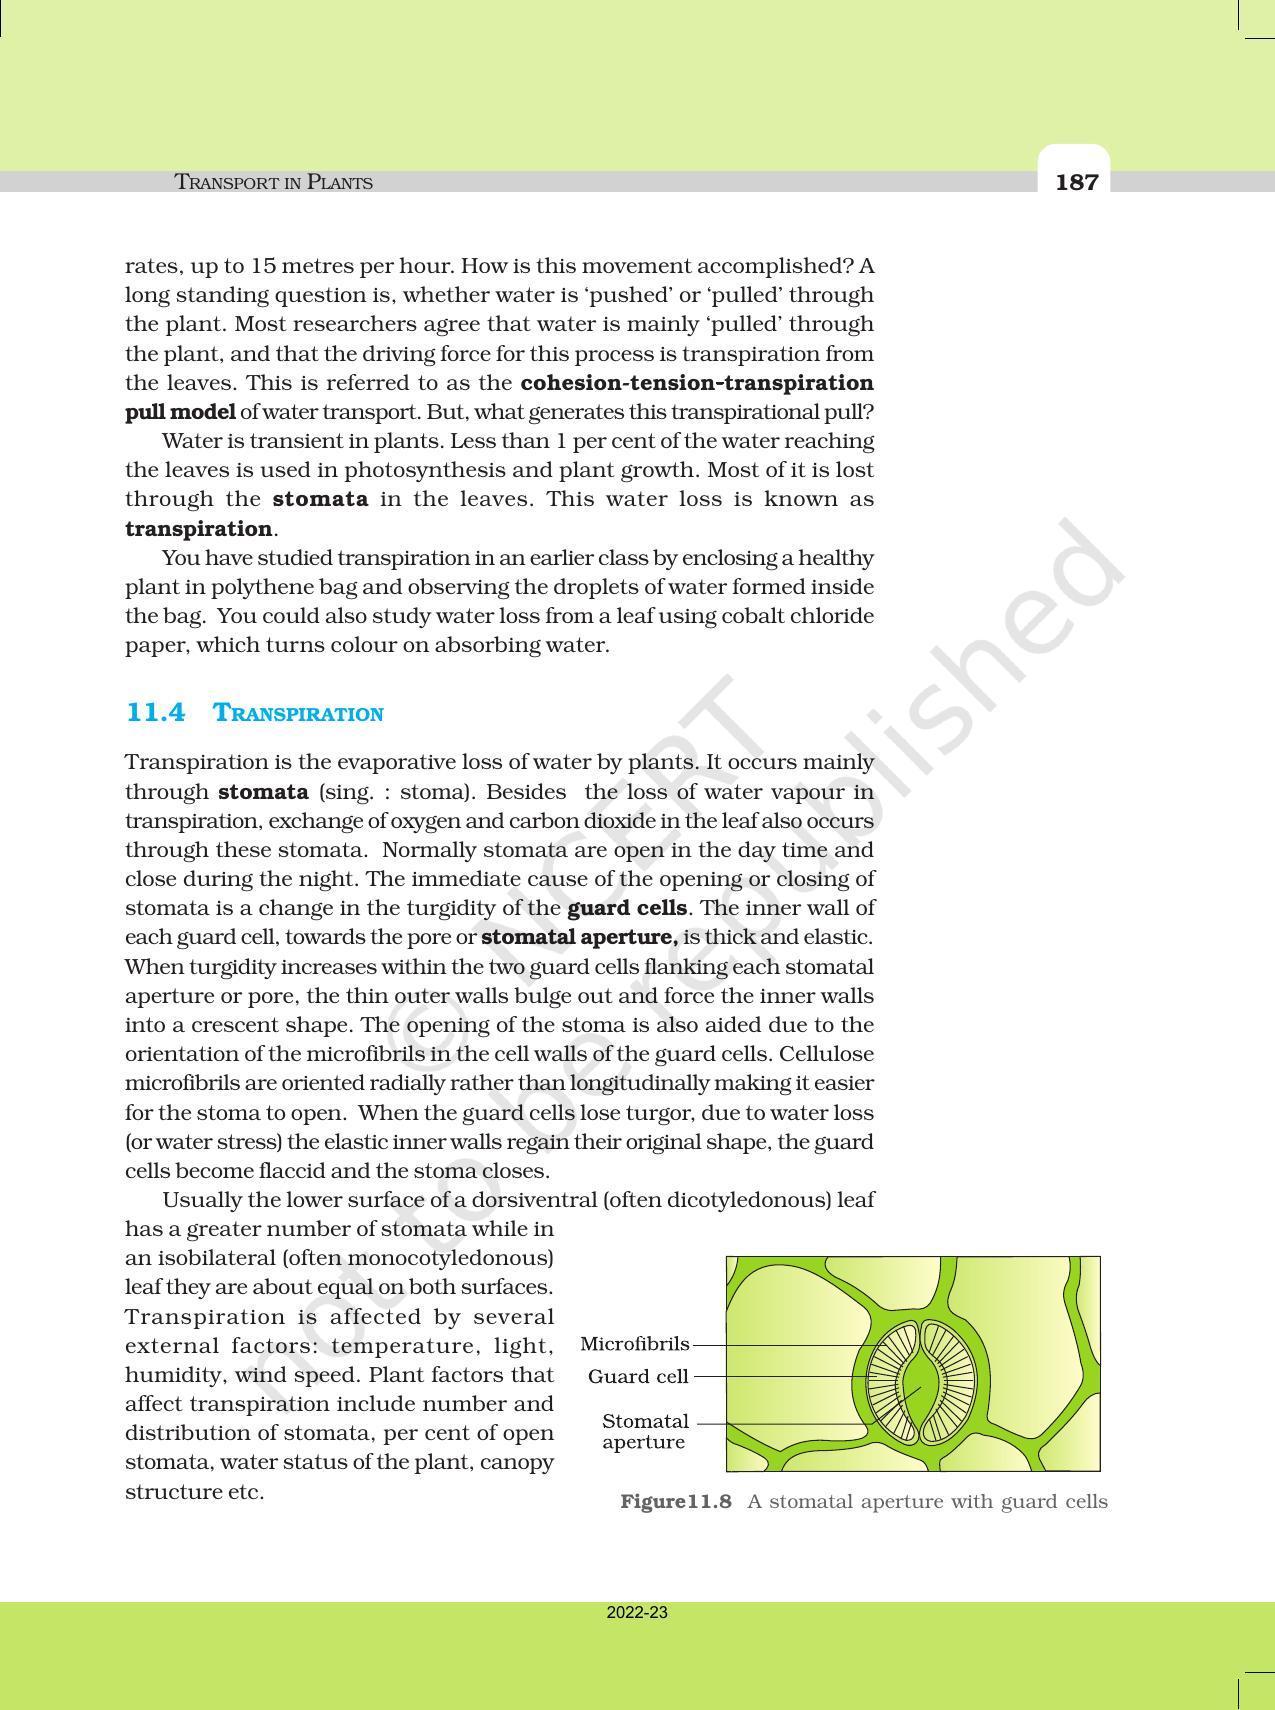 NCERT Book for Class 11 Biology Chapter 11 Transport in Plants - Page 15